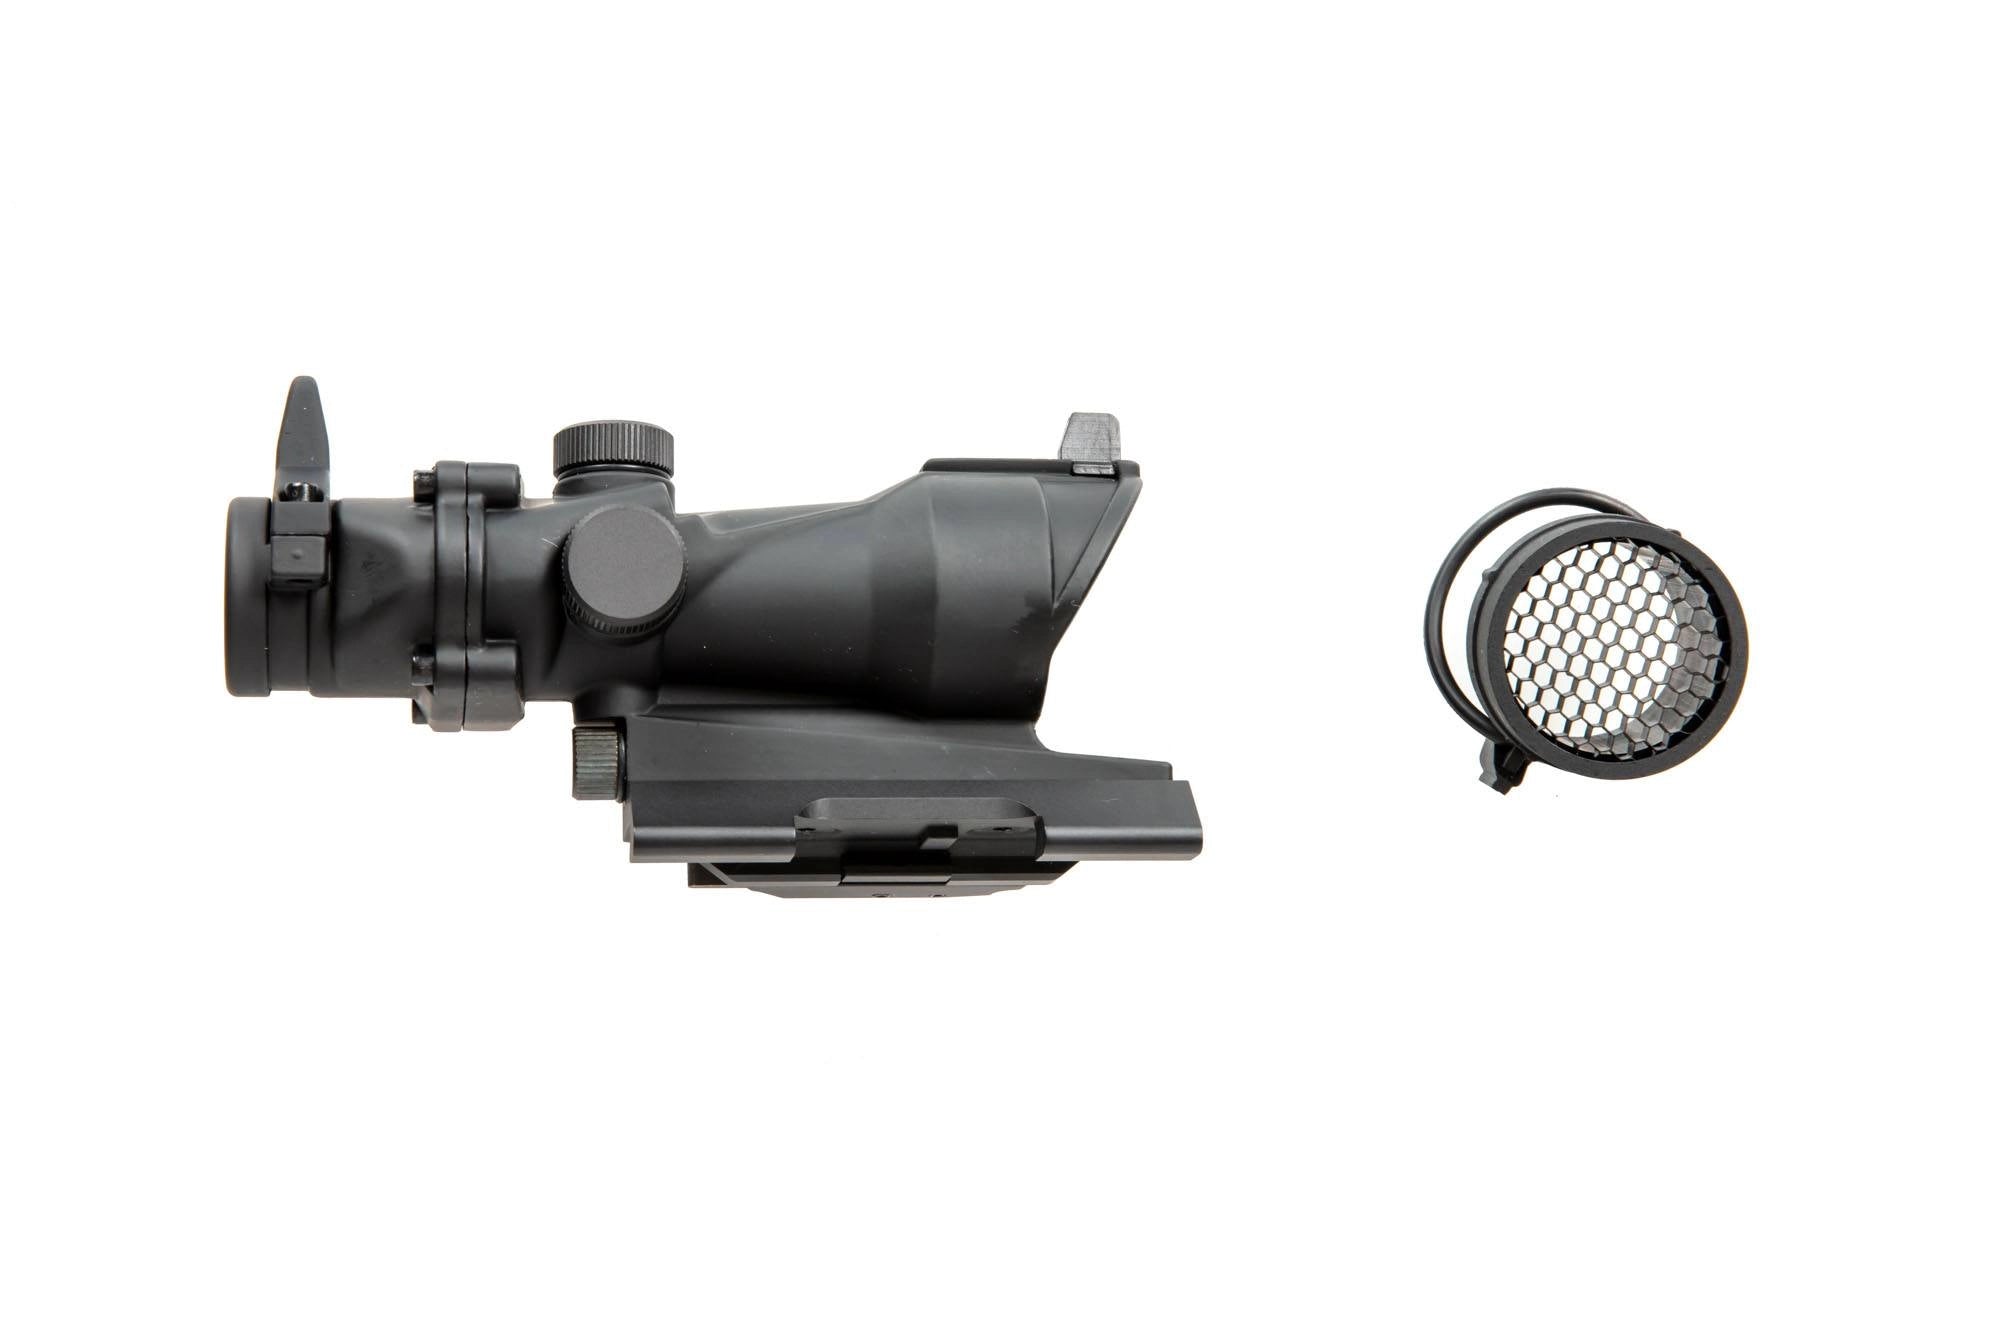 ACOG Style 4x32 Scope Replica with Killflash Cover, Lighting and QD V2 Mount - Black-2